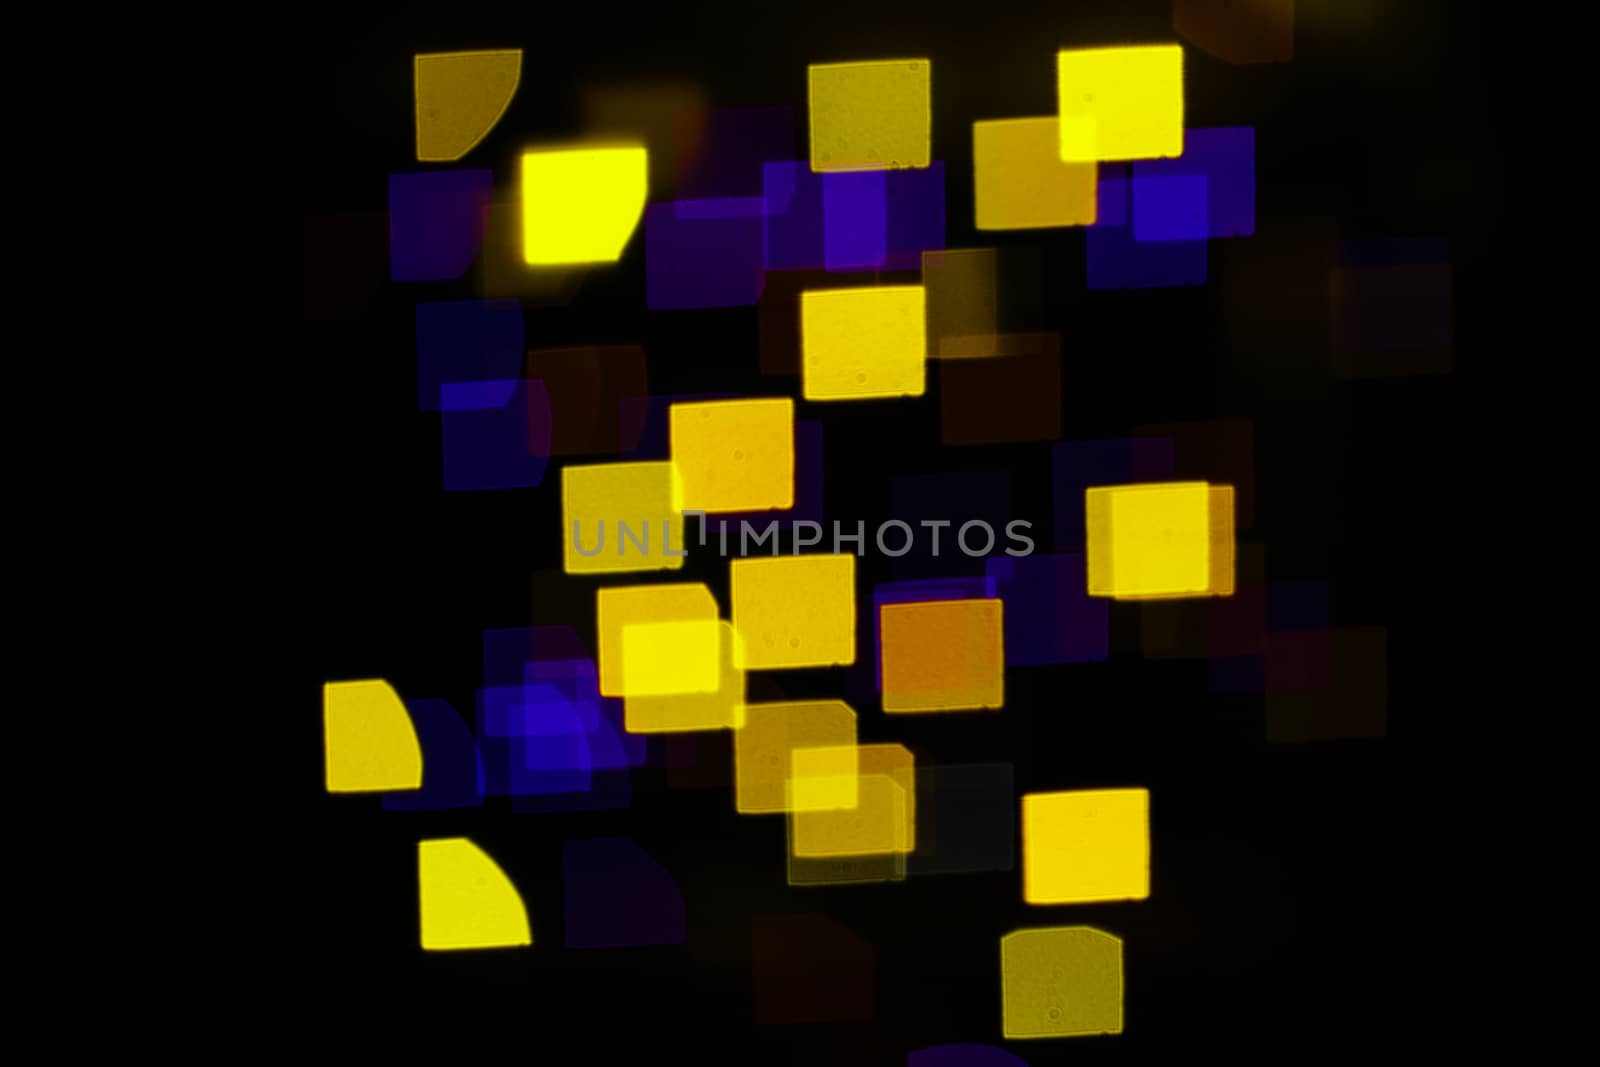 Abstract colorful background of geometric shapes, shot closeup